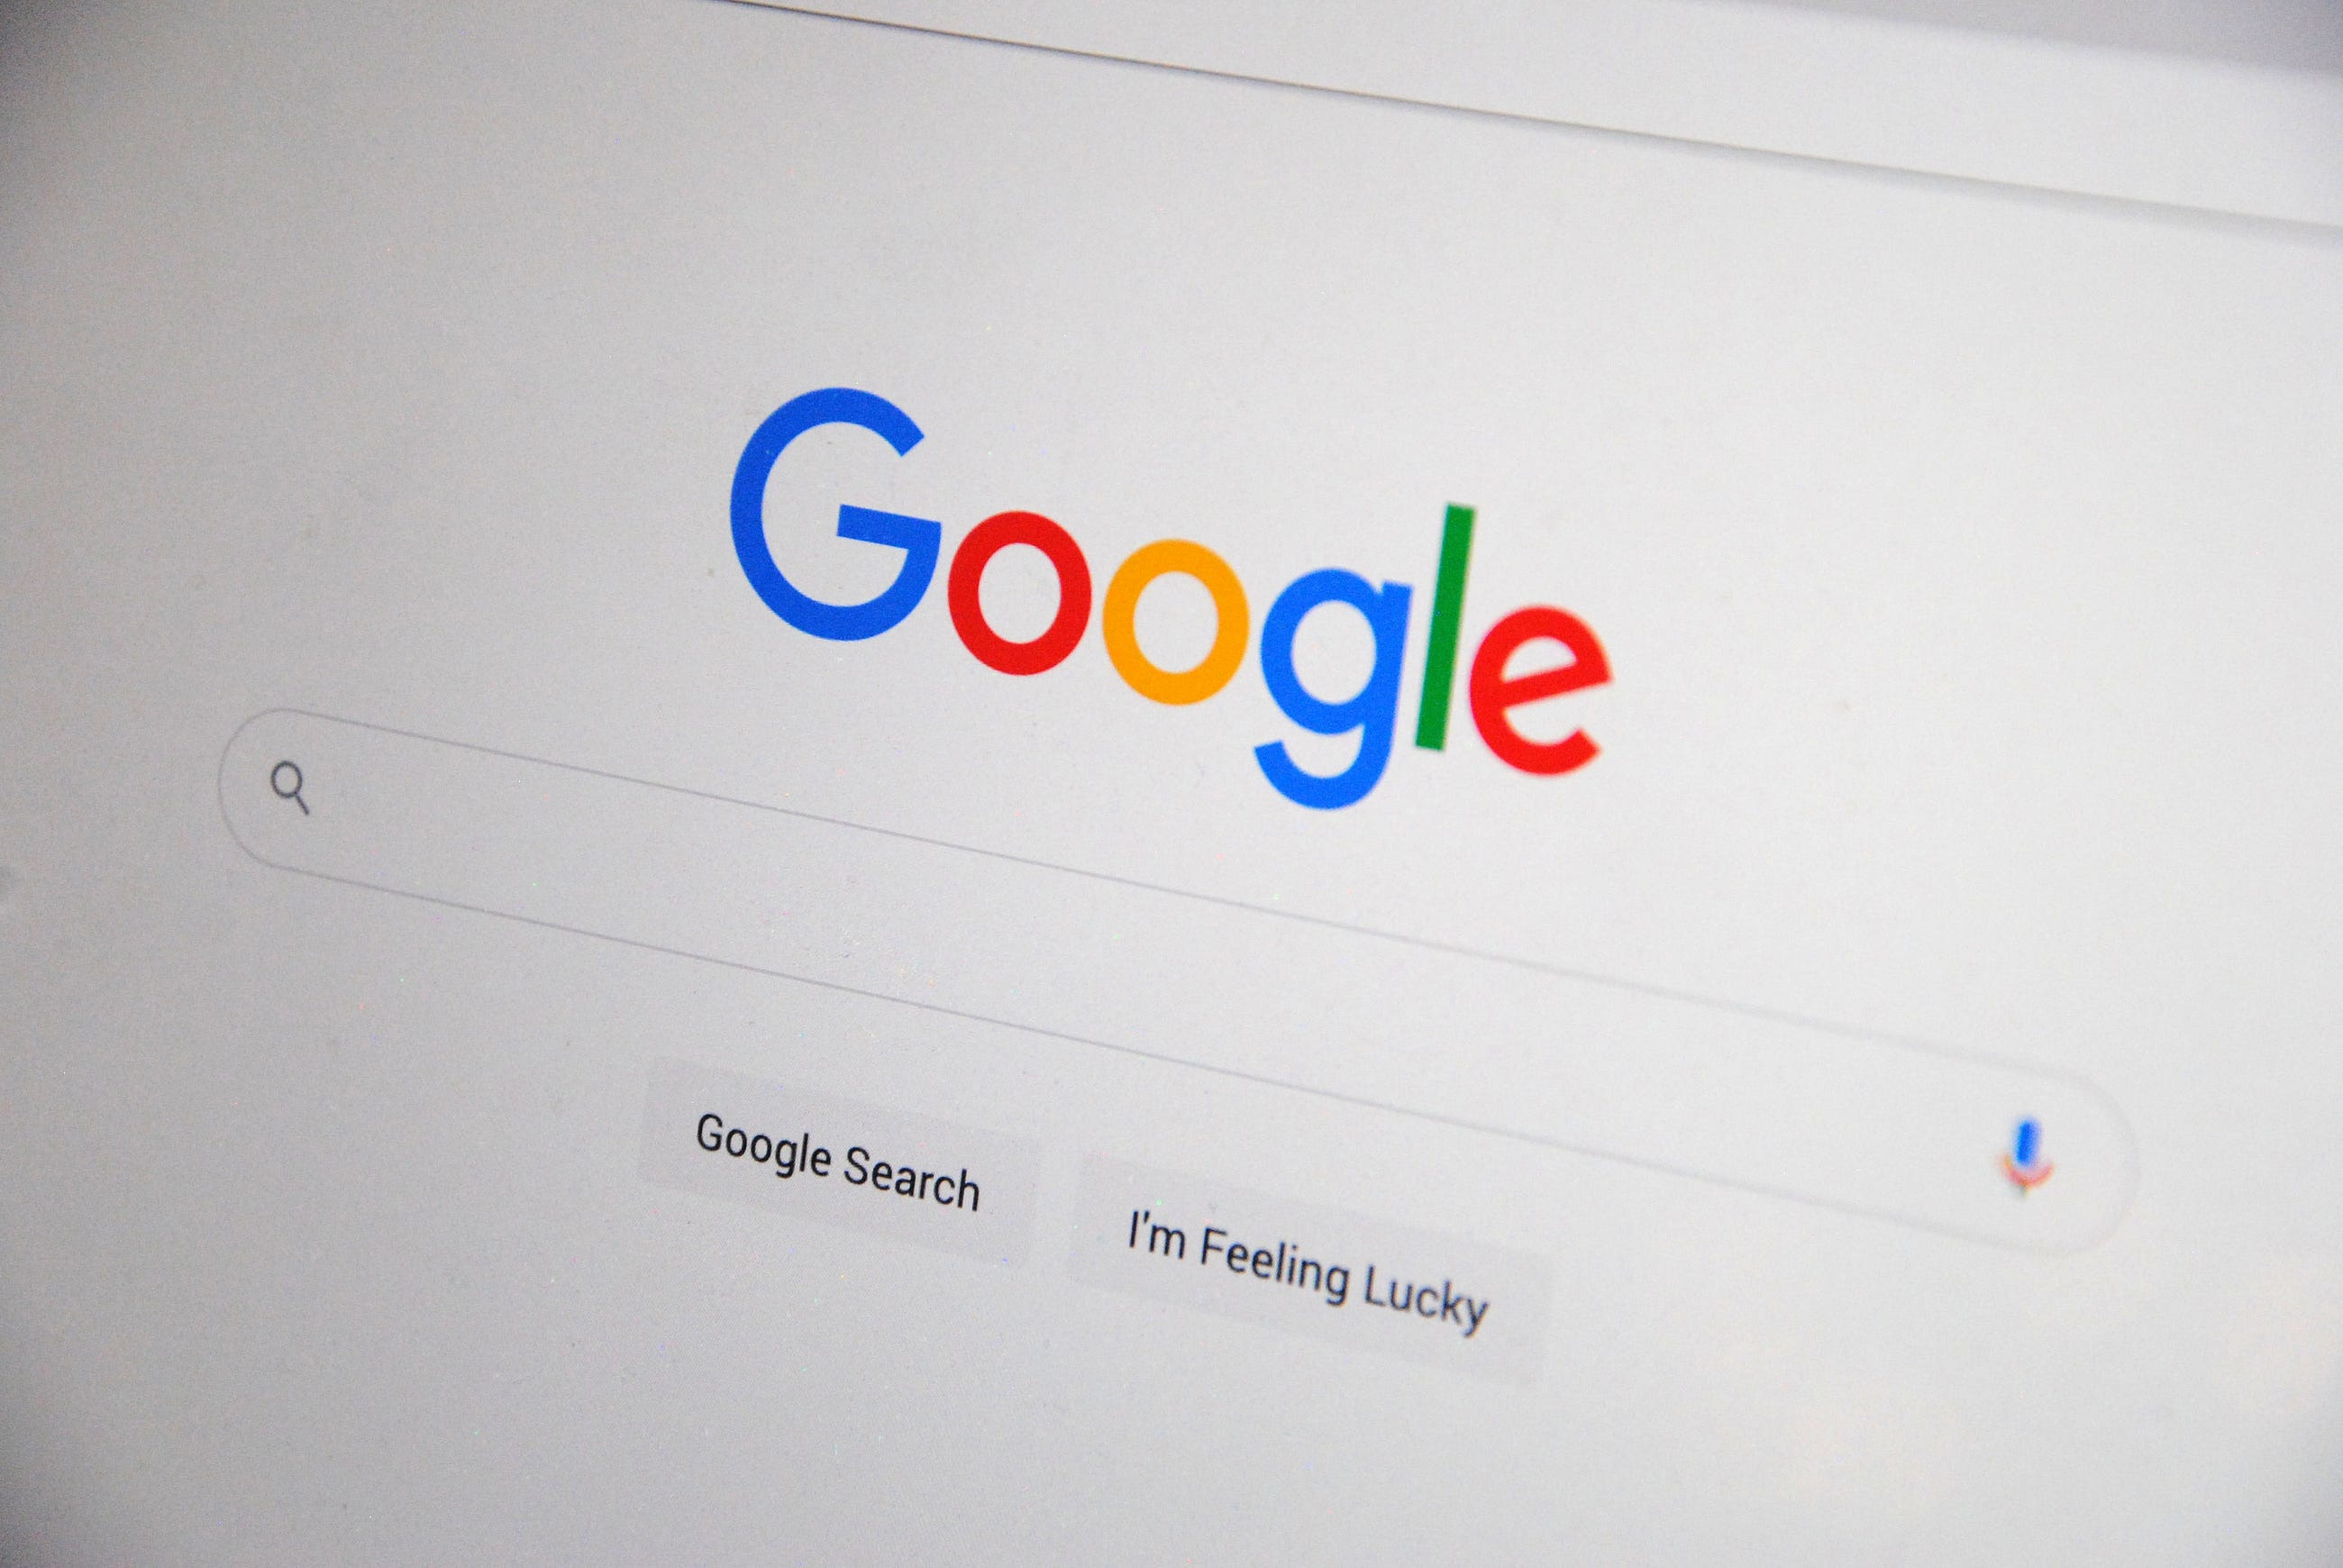 Business Growth Strategy by Getting into More Google Searches